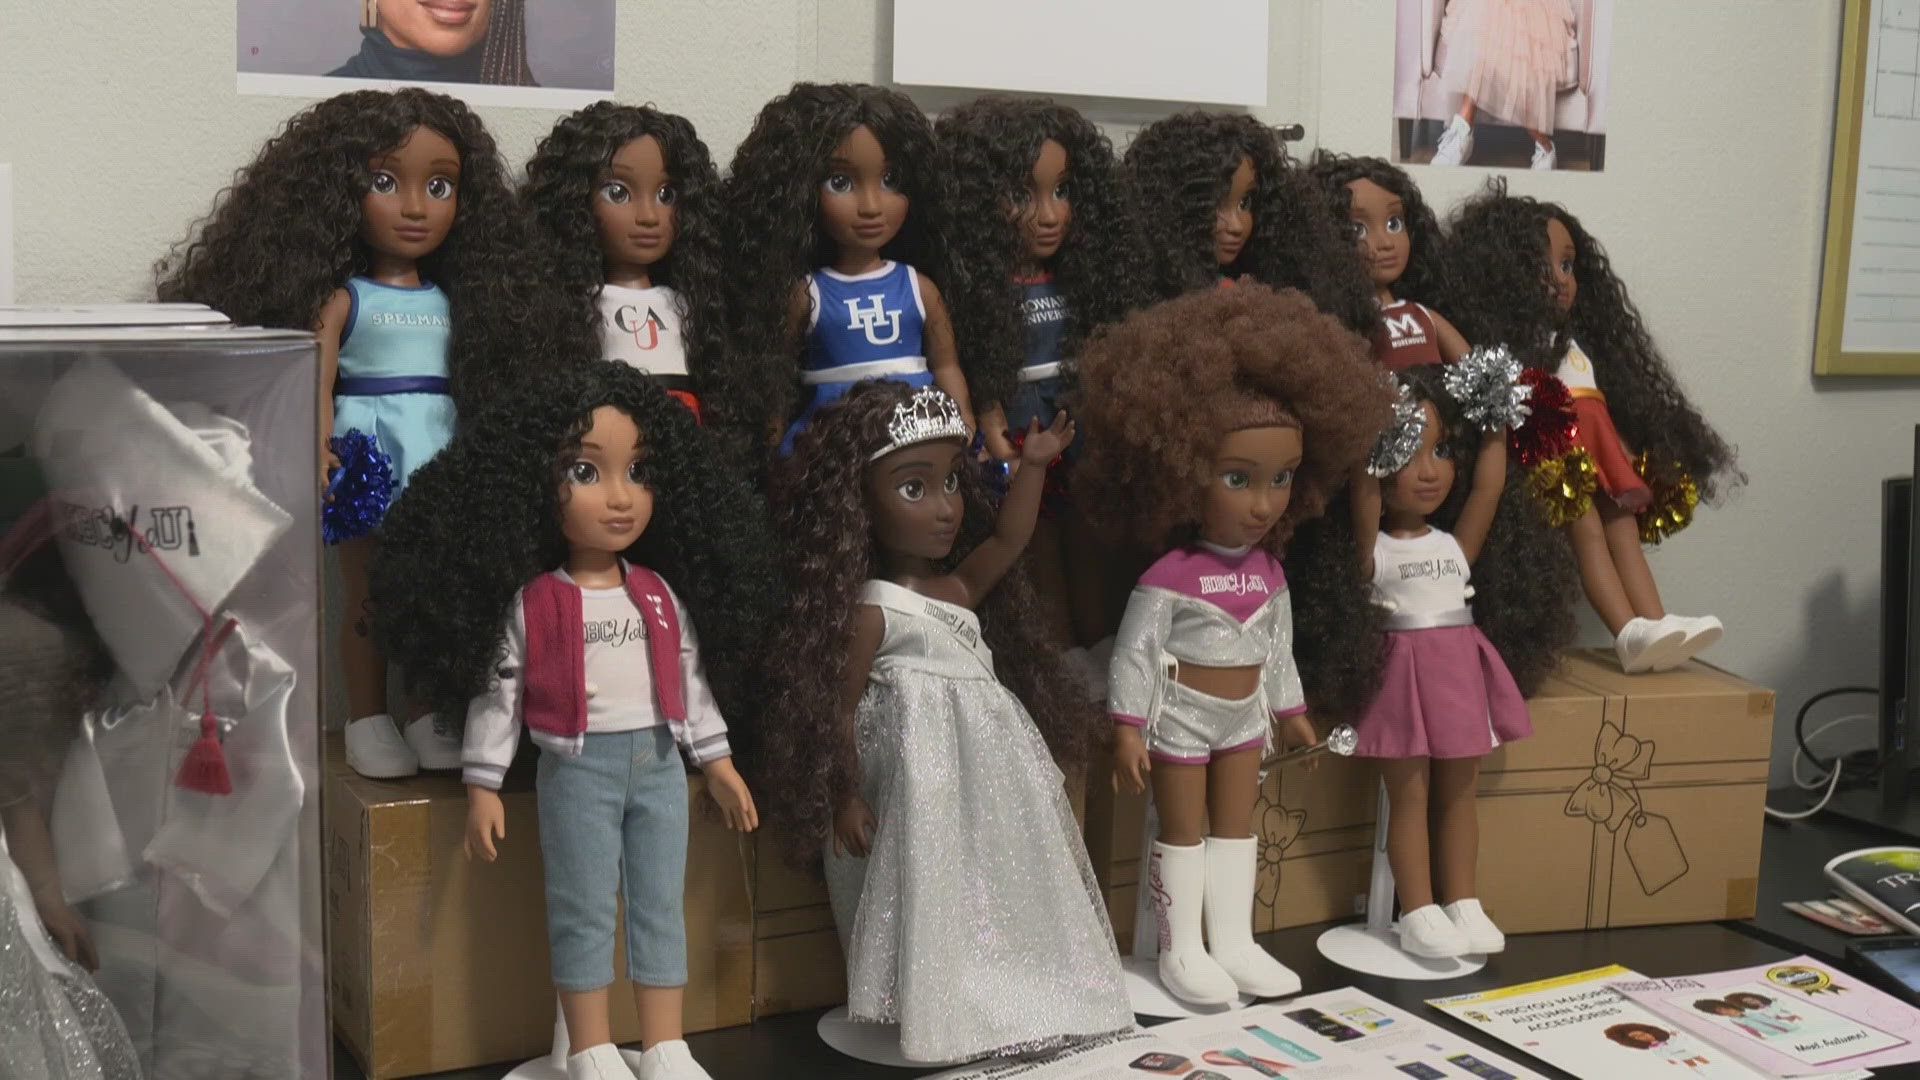 HBCYou Dolls, Founder Brooke Hart Jones told WFAA, is the first and only HBCU doll line sold in major retail stores worldwide.